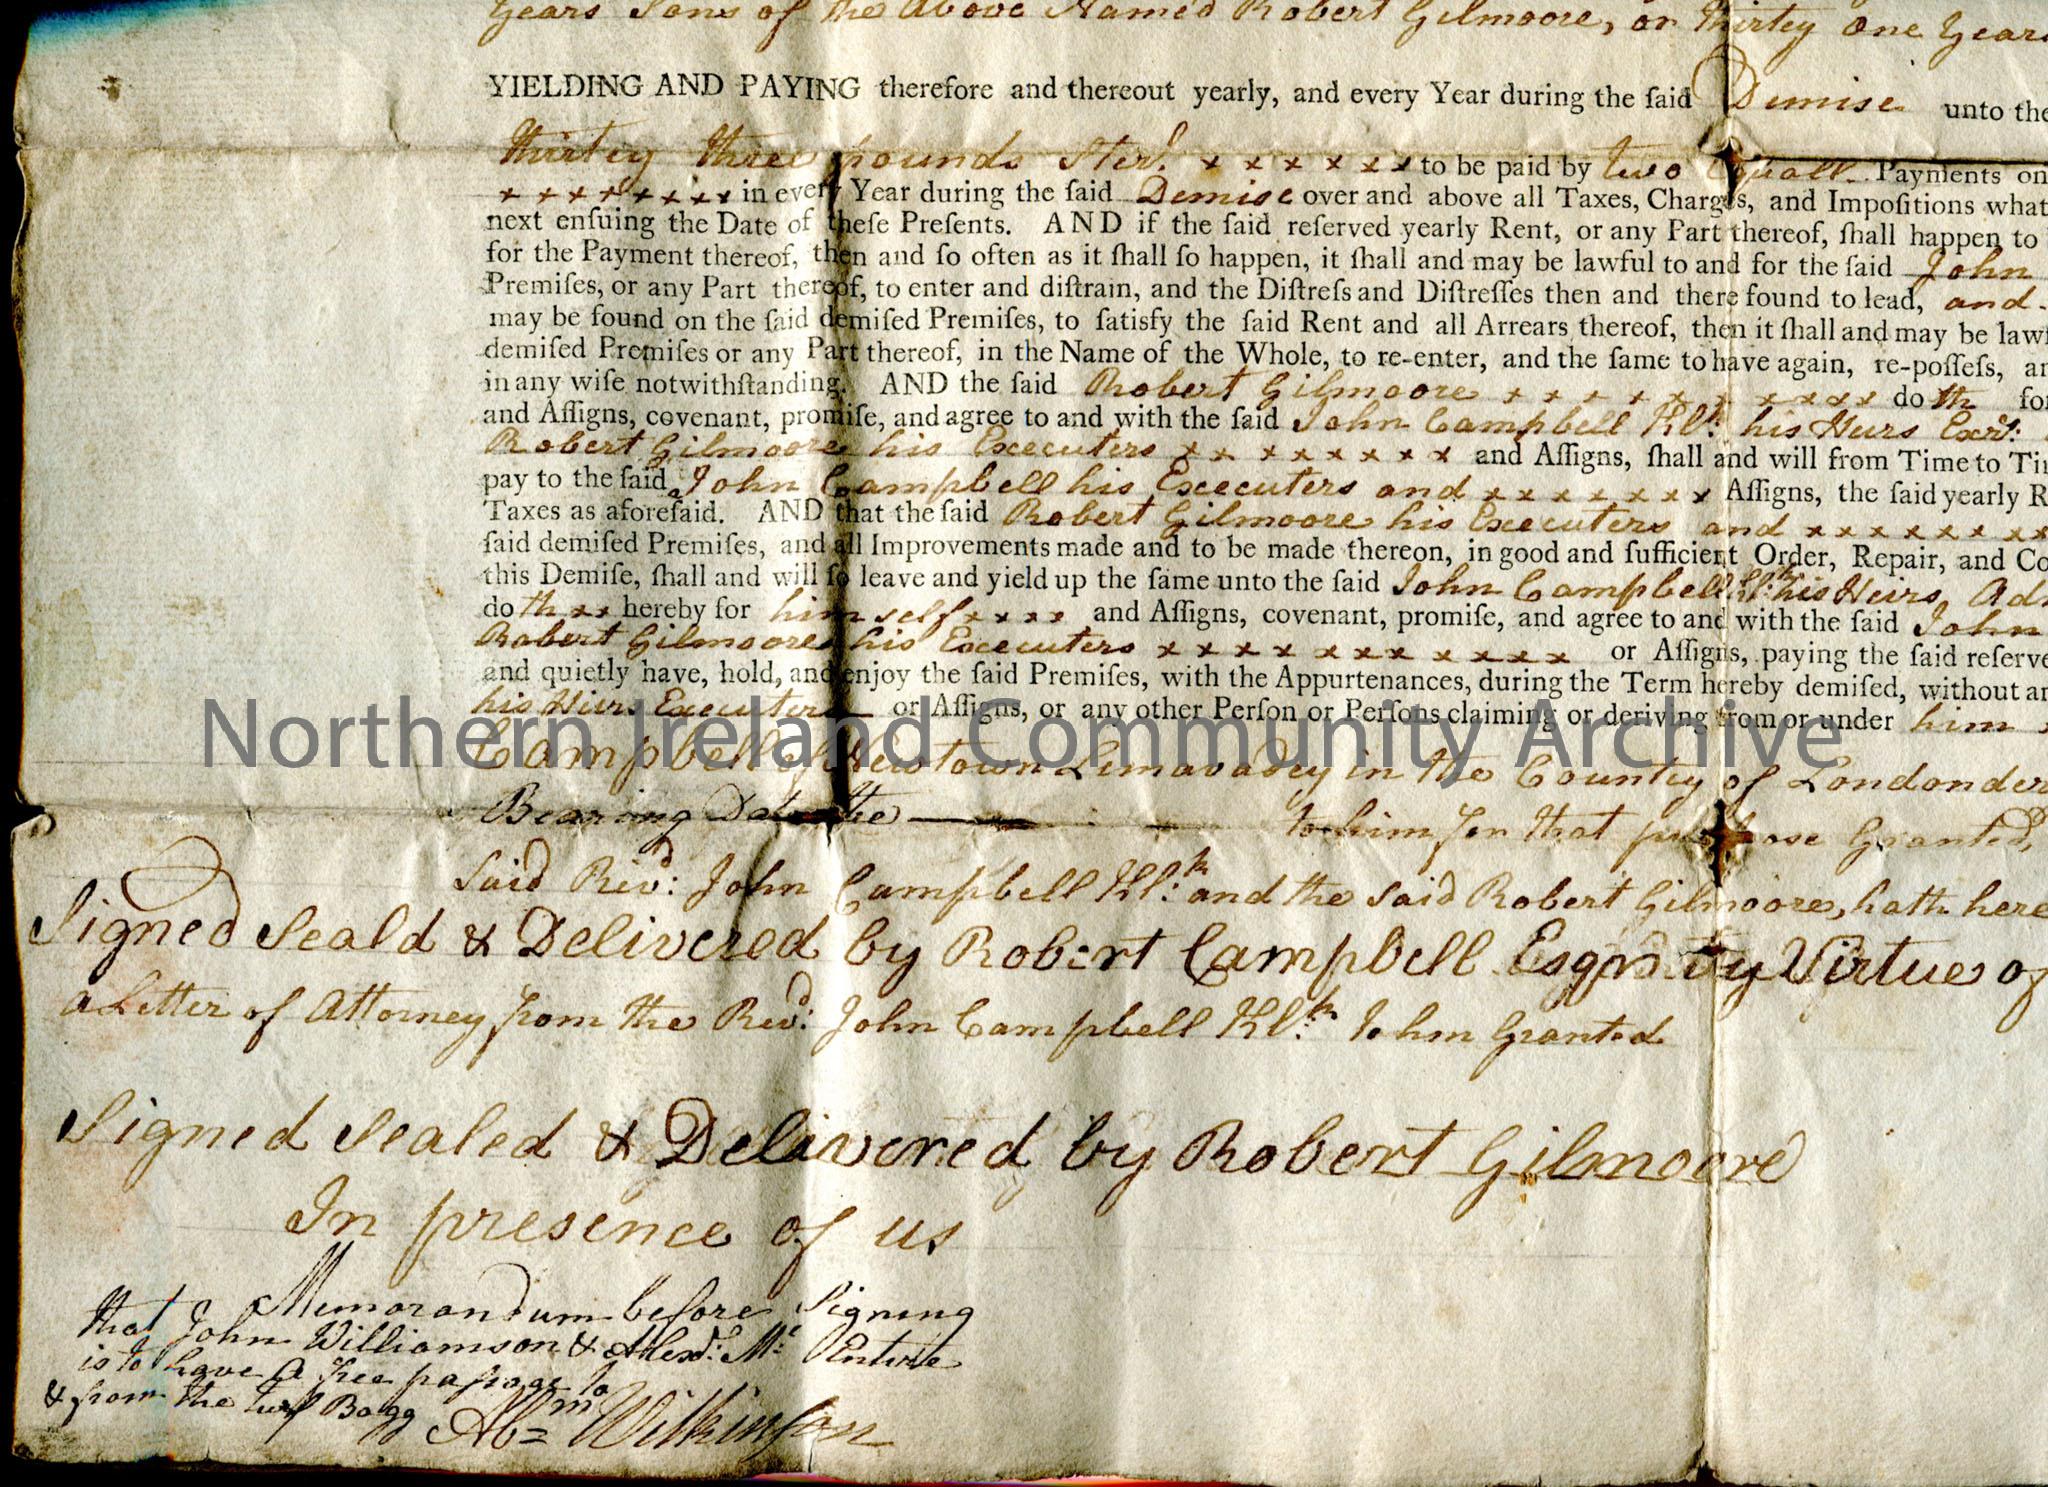 18th century indenture for land rental agreement, with conditions of lease, for land in Ballyvelton – img115c